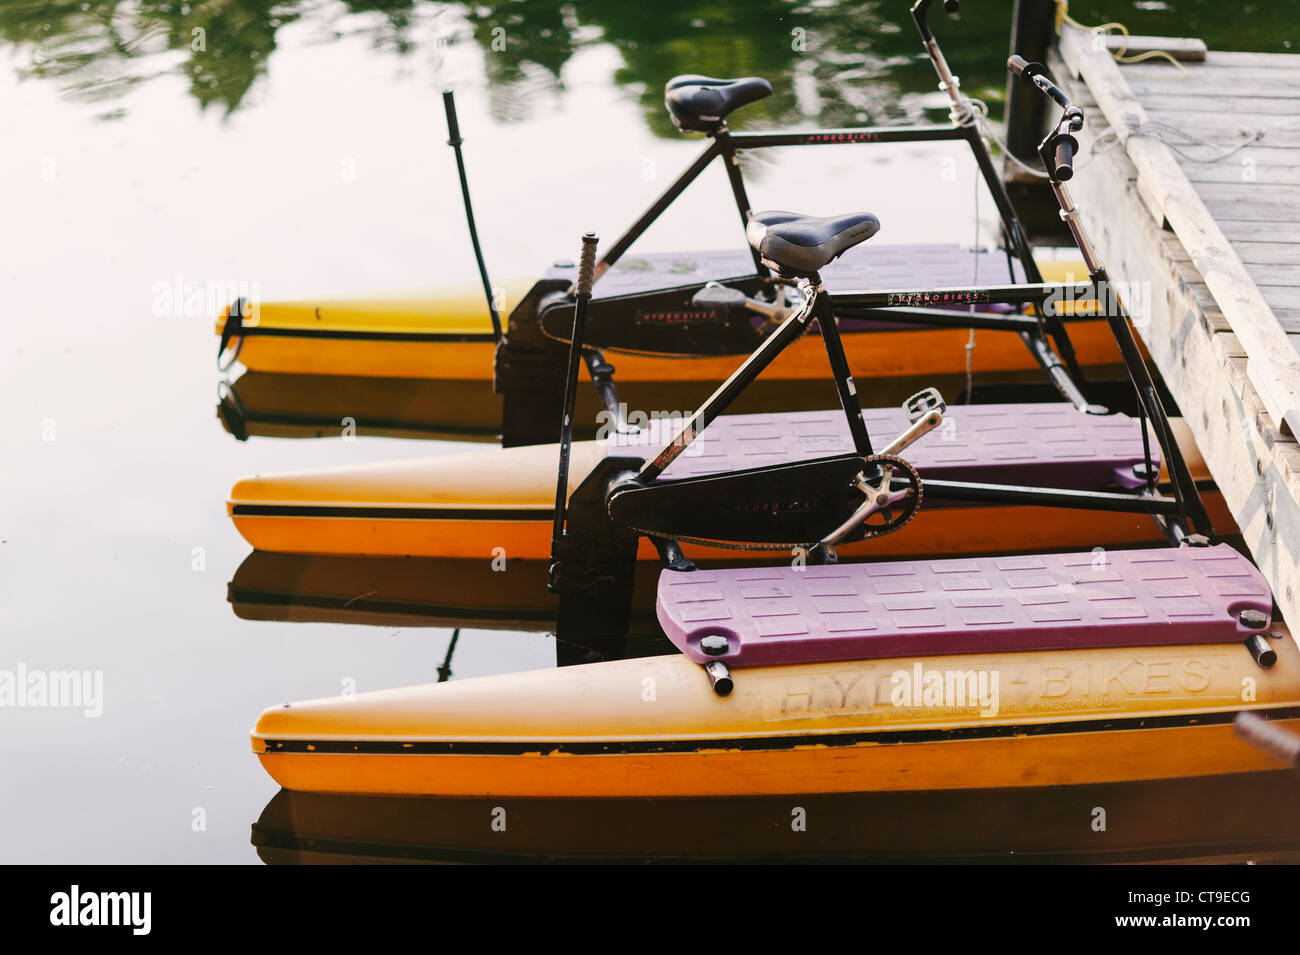 Row of yellow paddle peddle boats Stock Photo